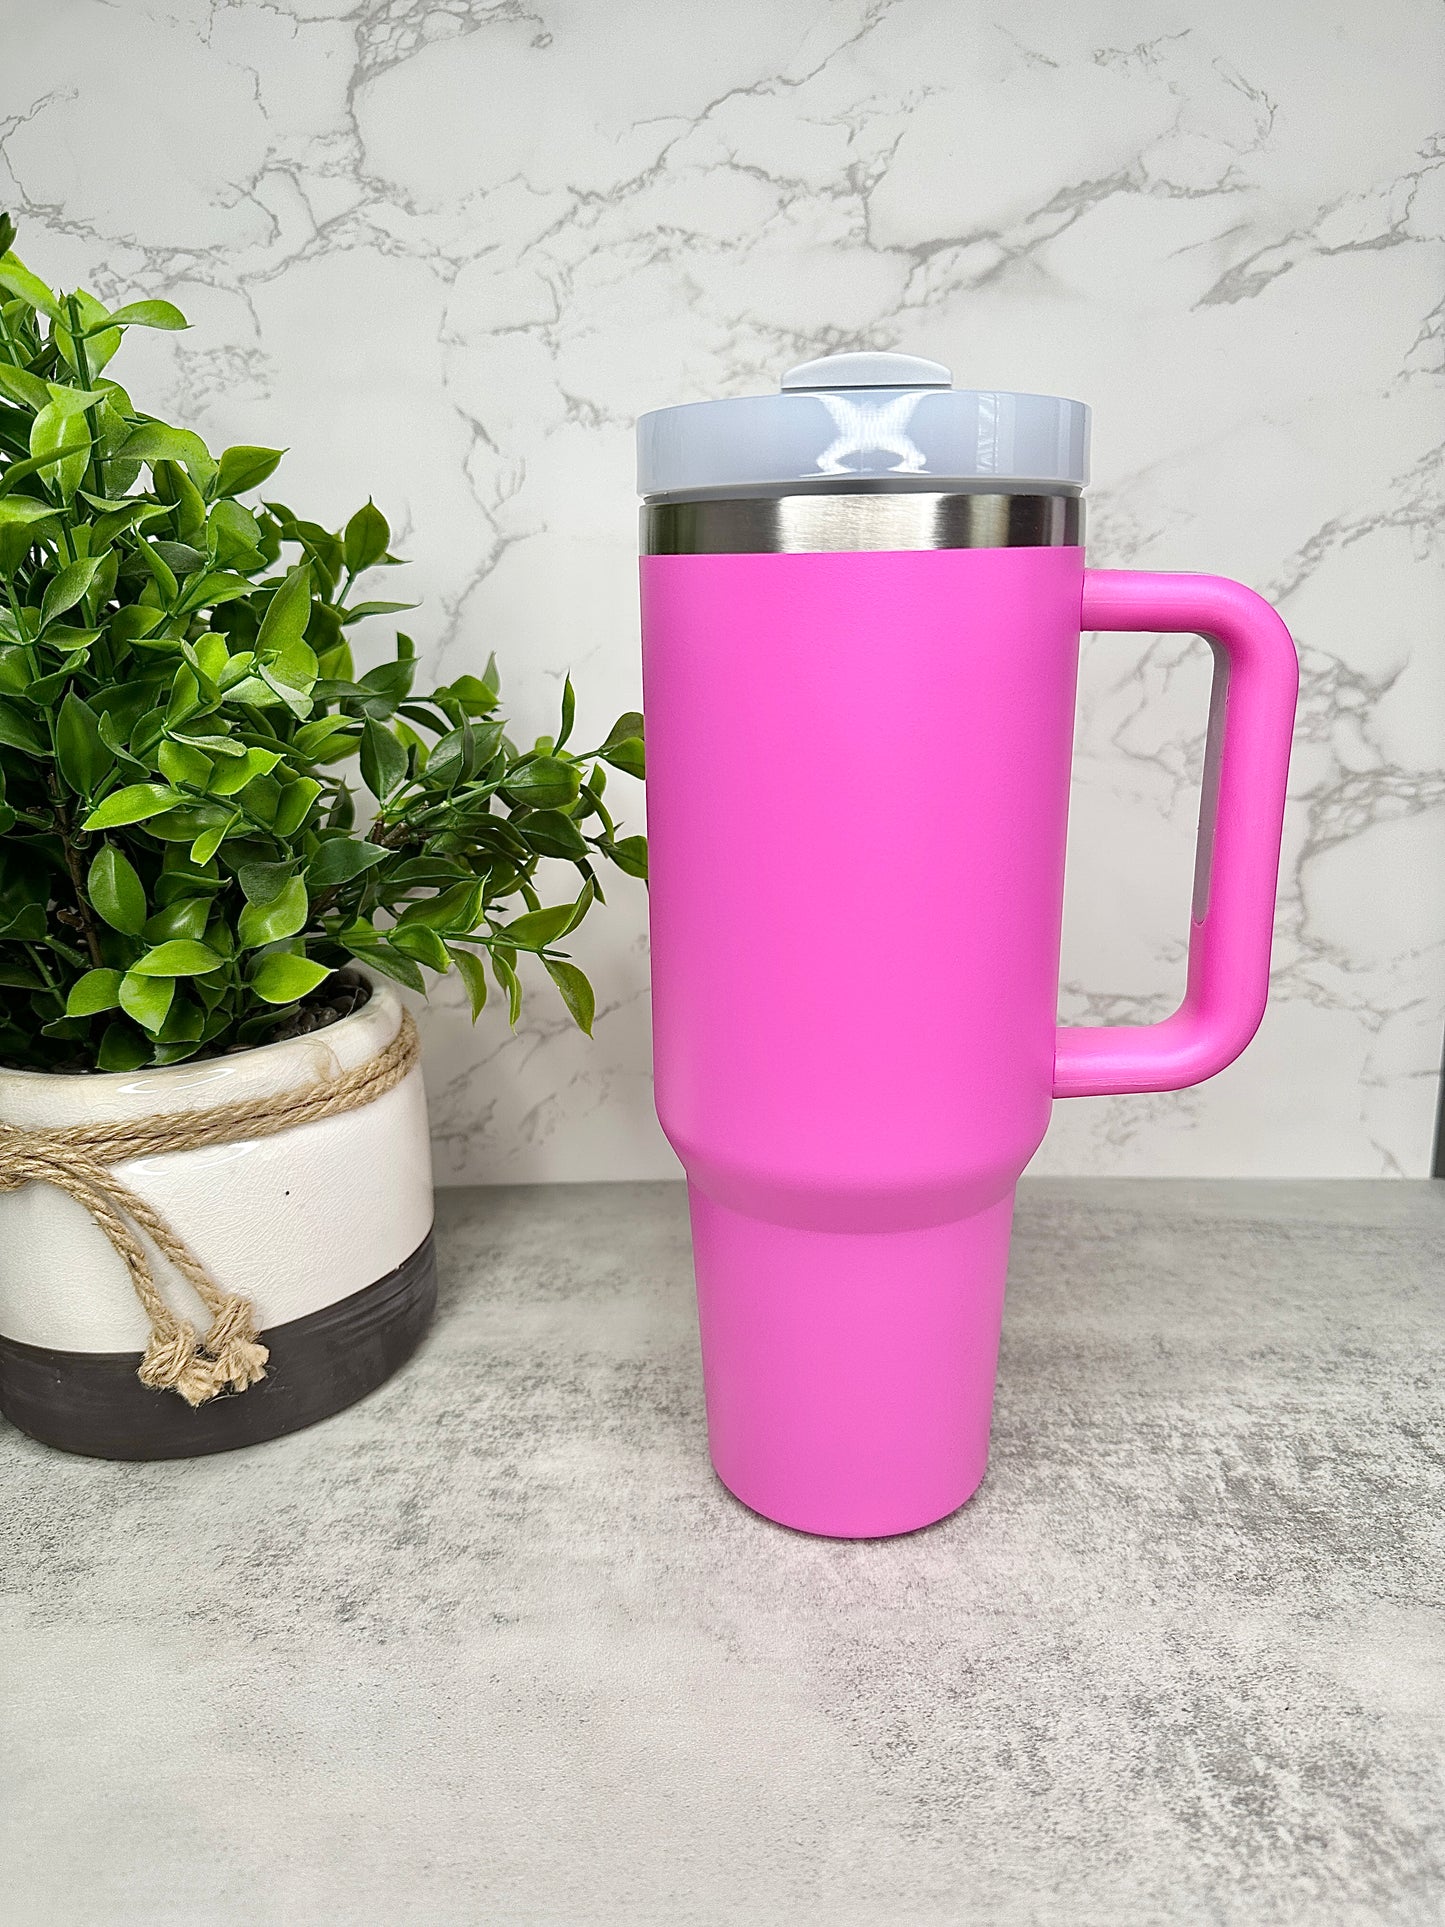 This insulated travel mug is the perfect Stanley tumbler lookalike